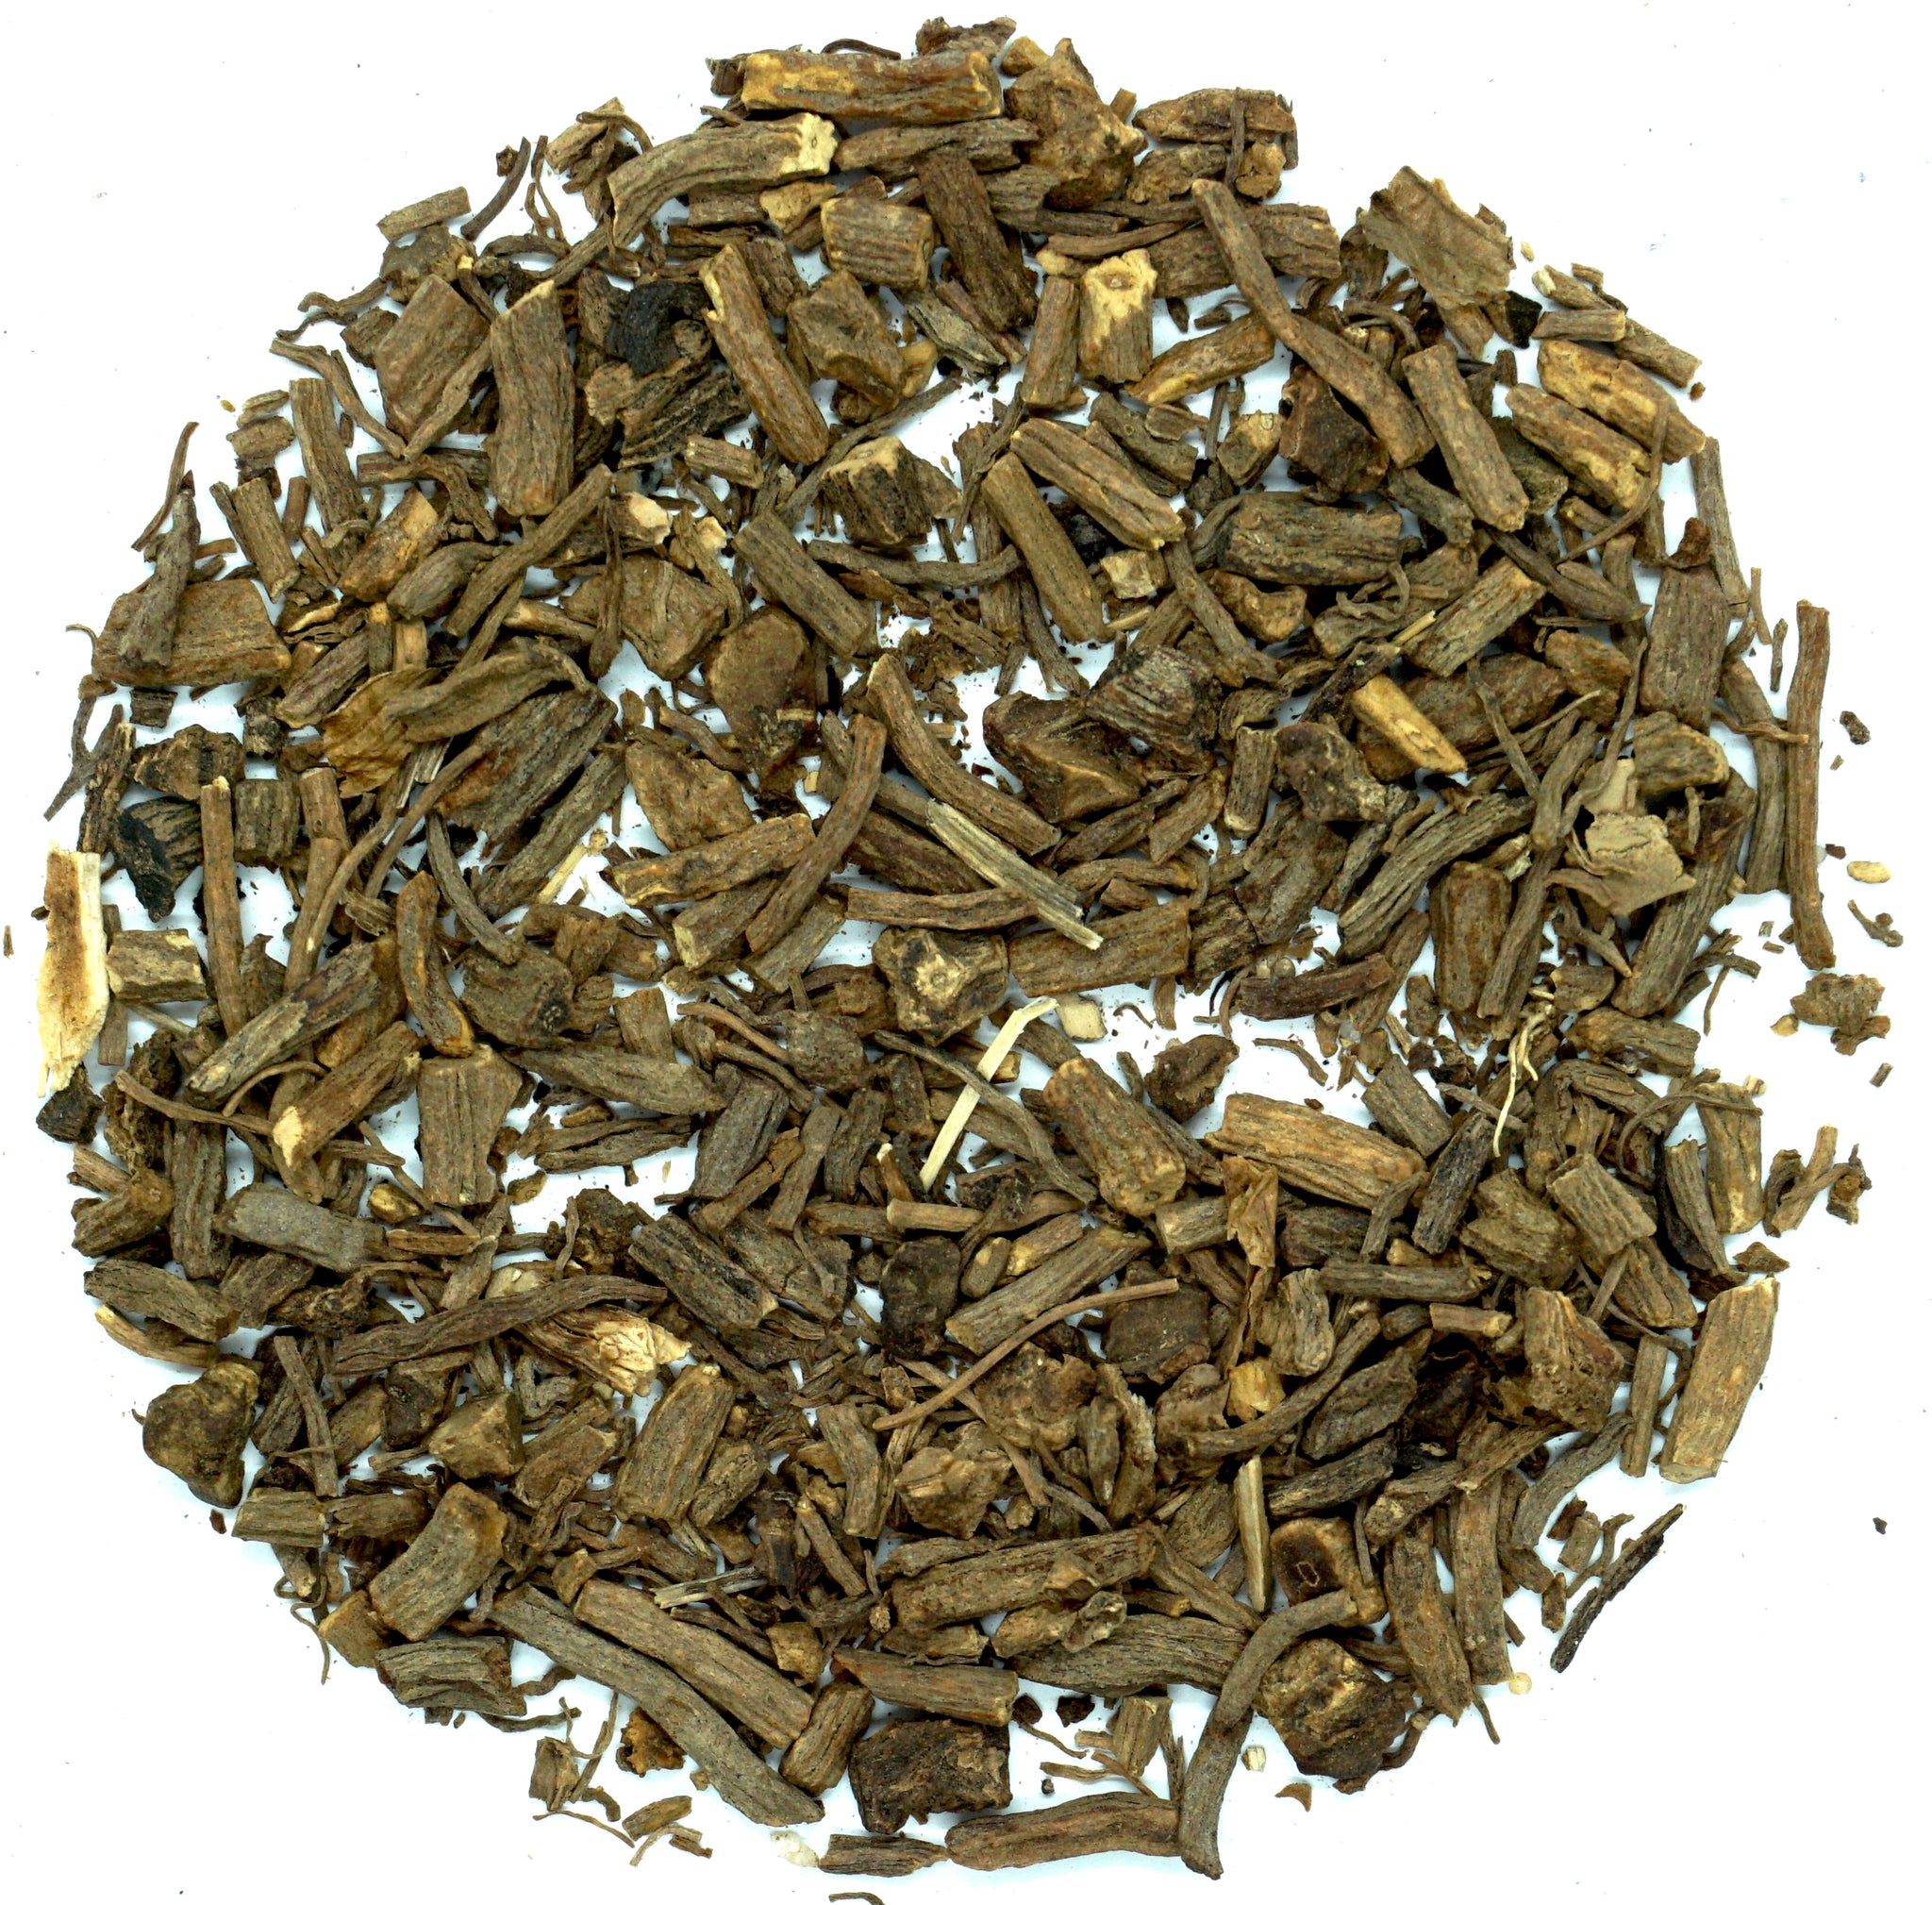 valerian-root-wellness-tea-helps-with-anxiety